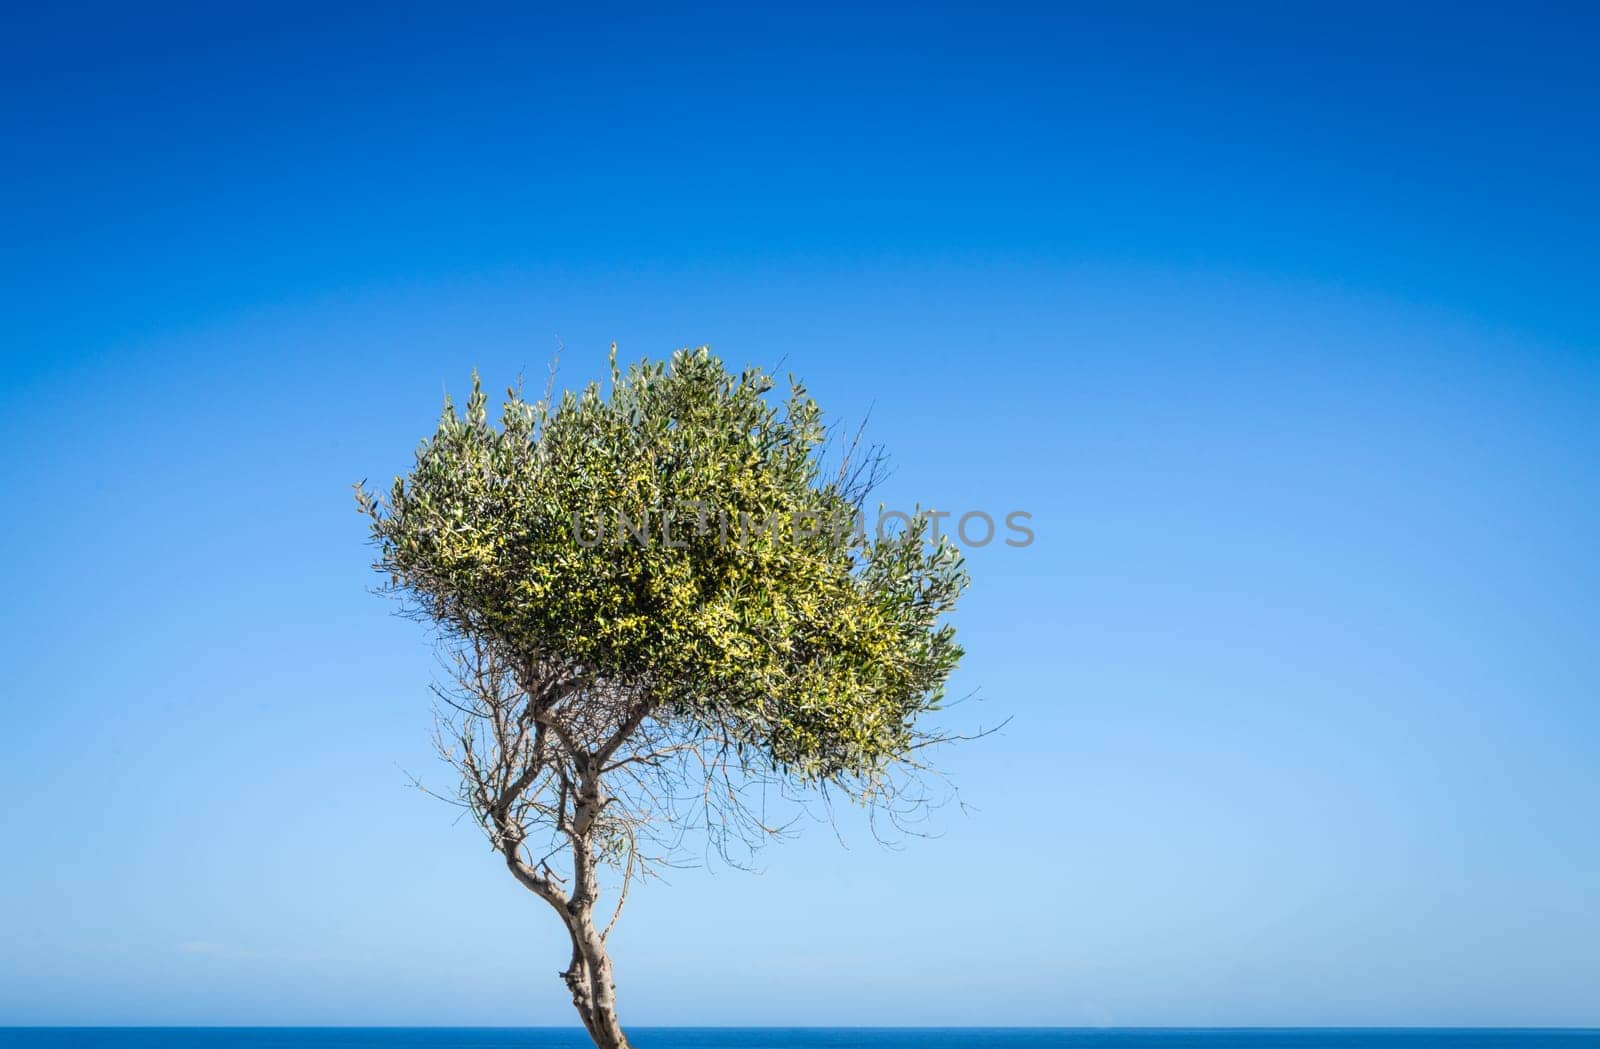 the tree in front of the sea by sergiodv